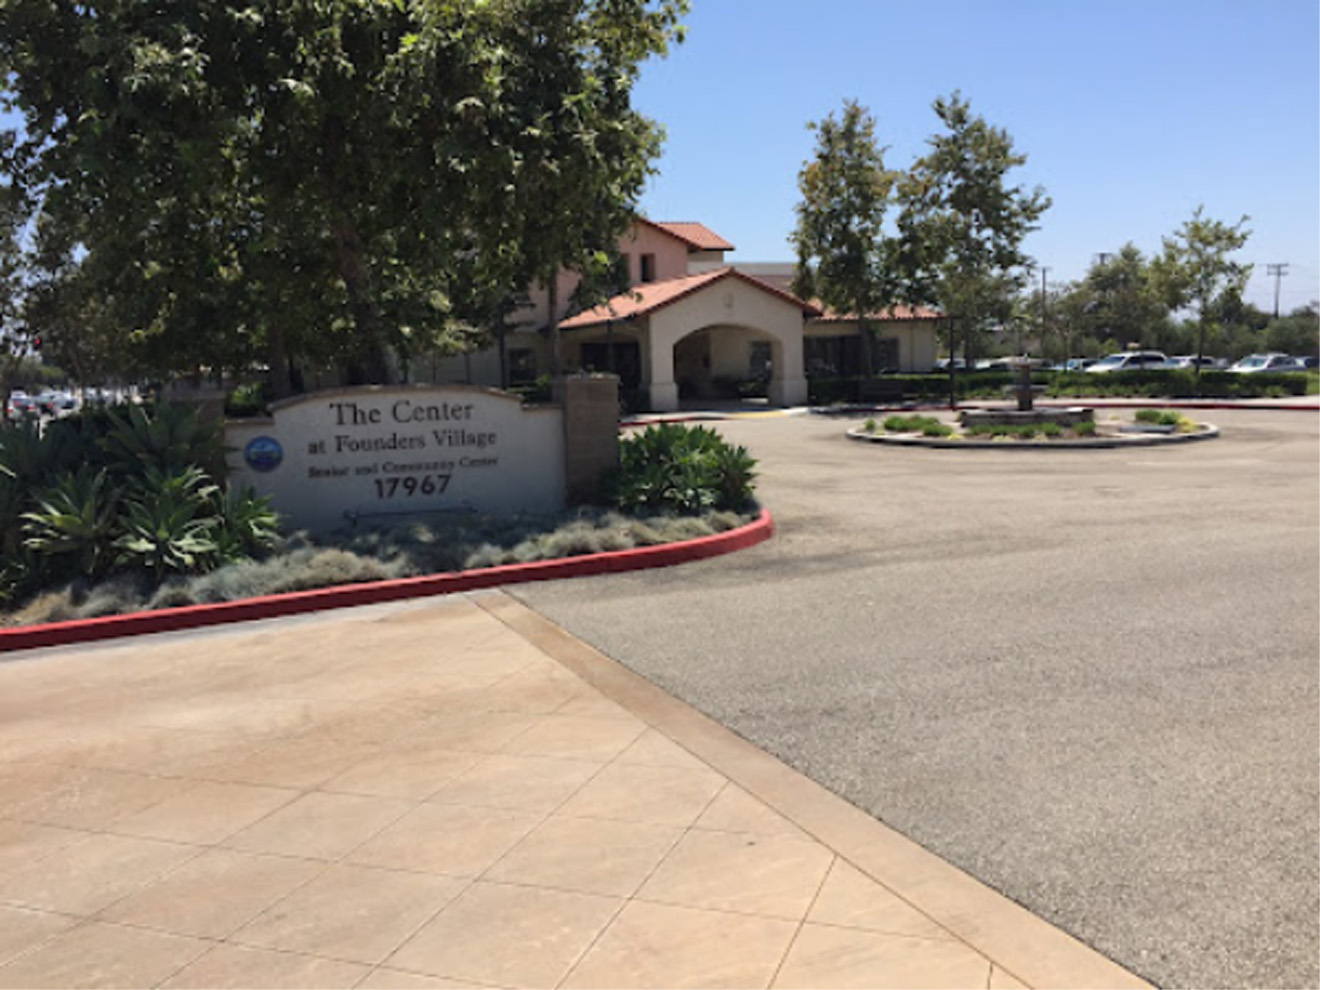 Fountain Valley Founders' Center